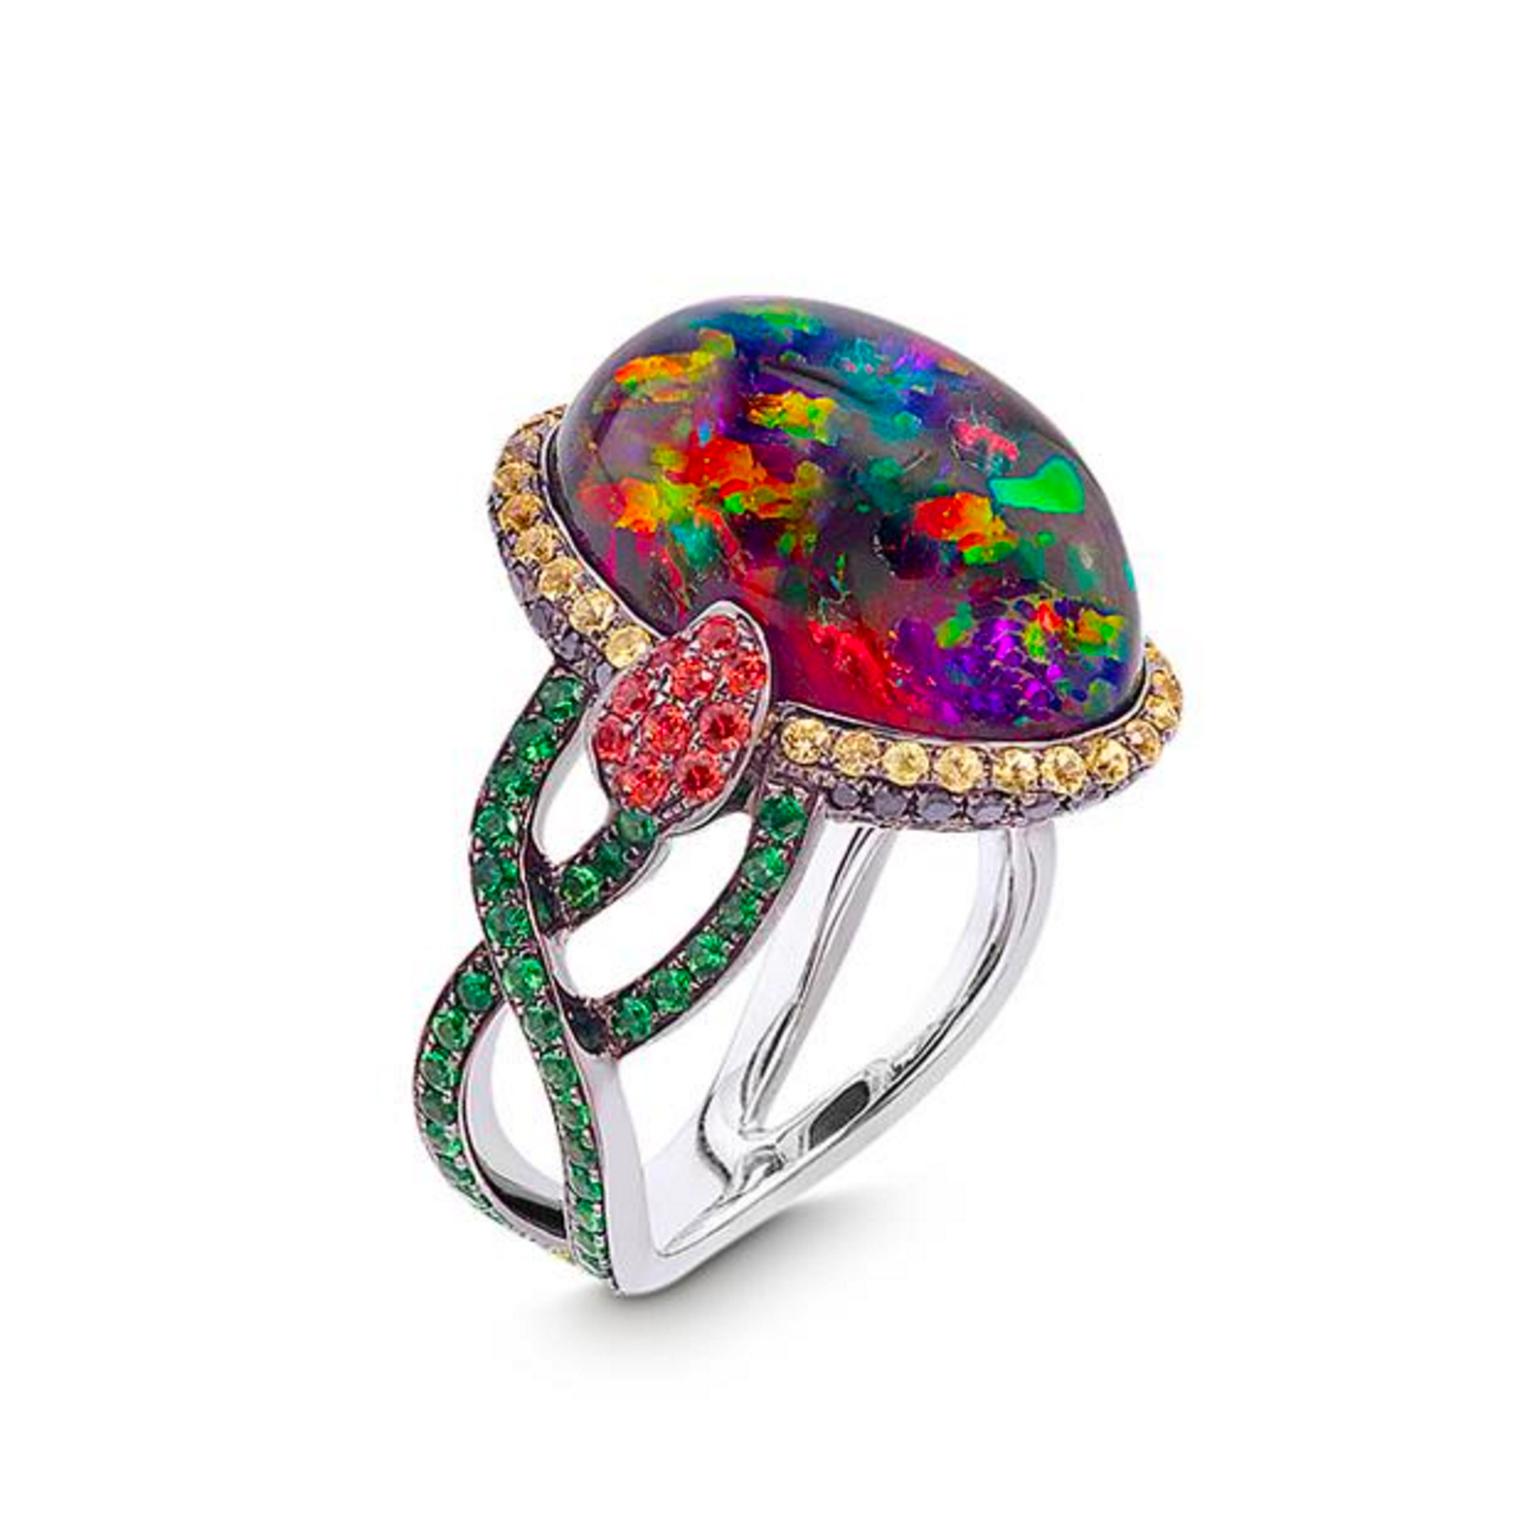 Femme Fatale Mexican anhydrous opal ring | Katherine Jetter | The ...